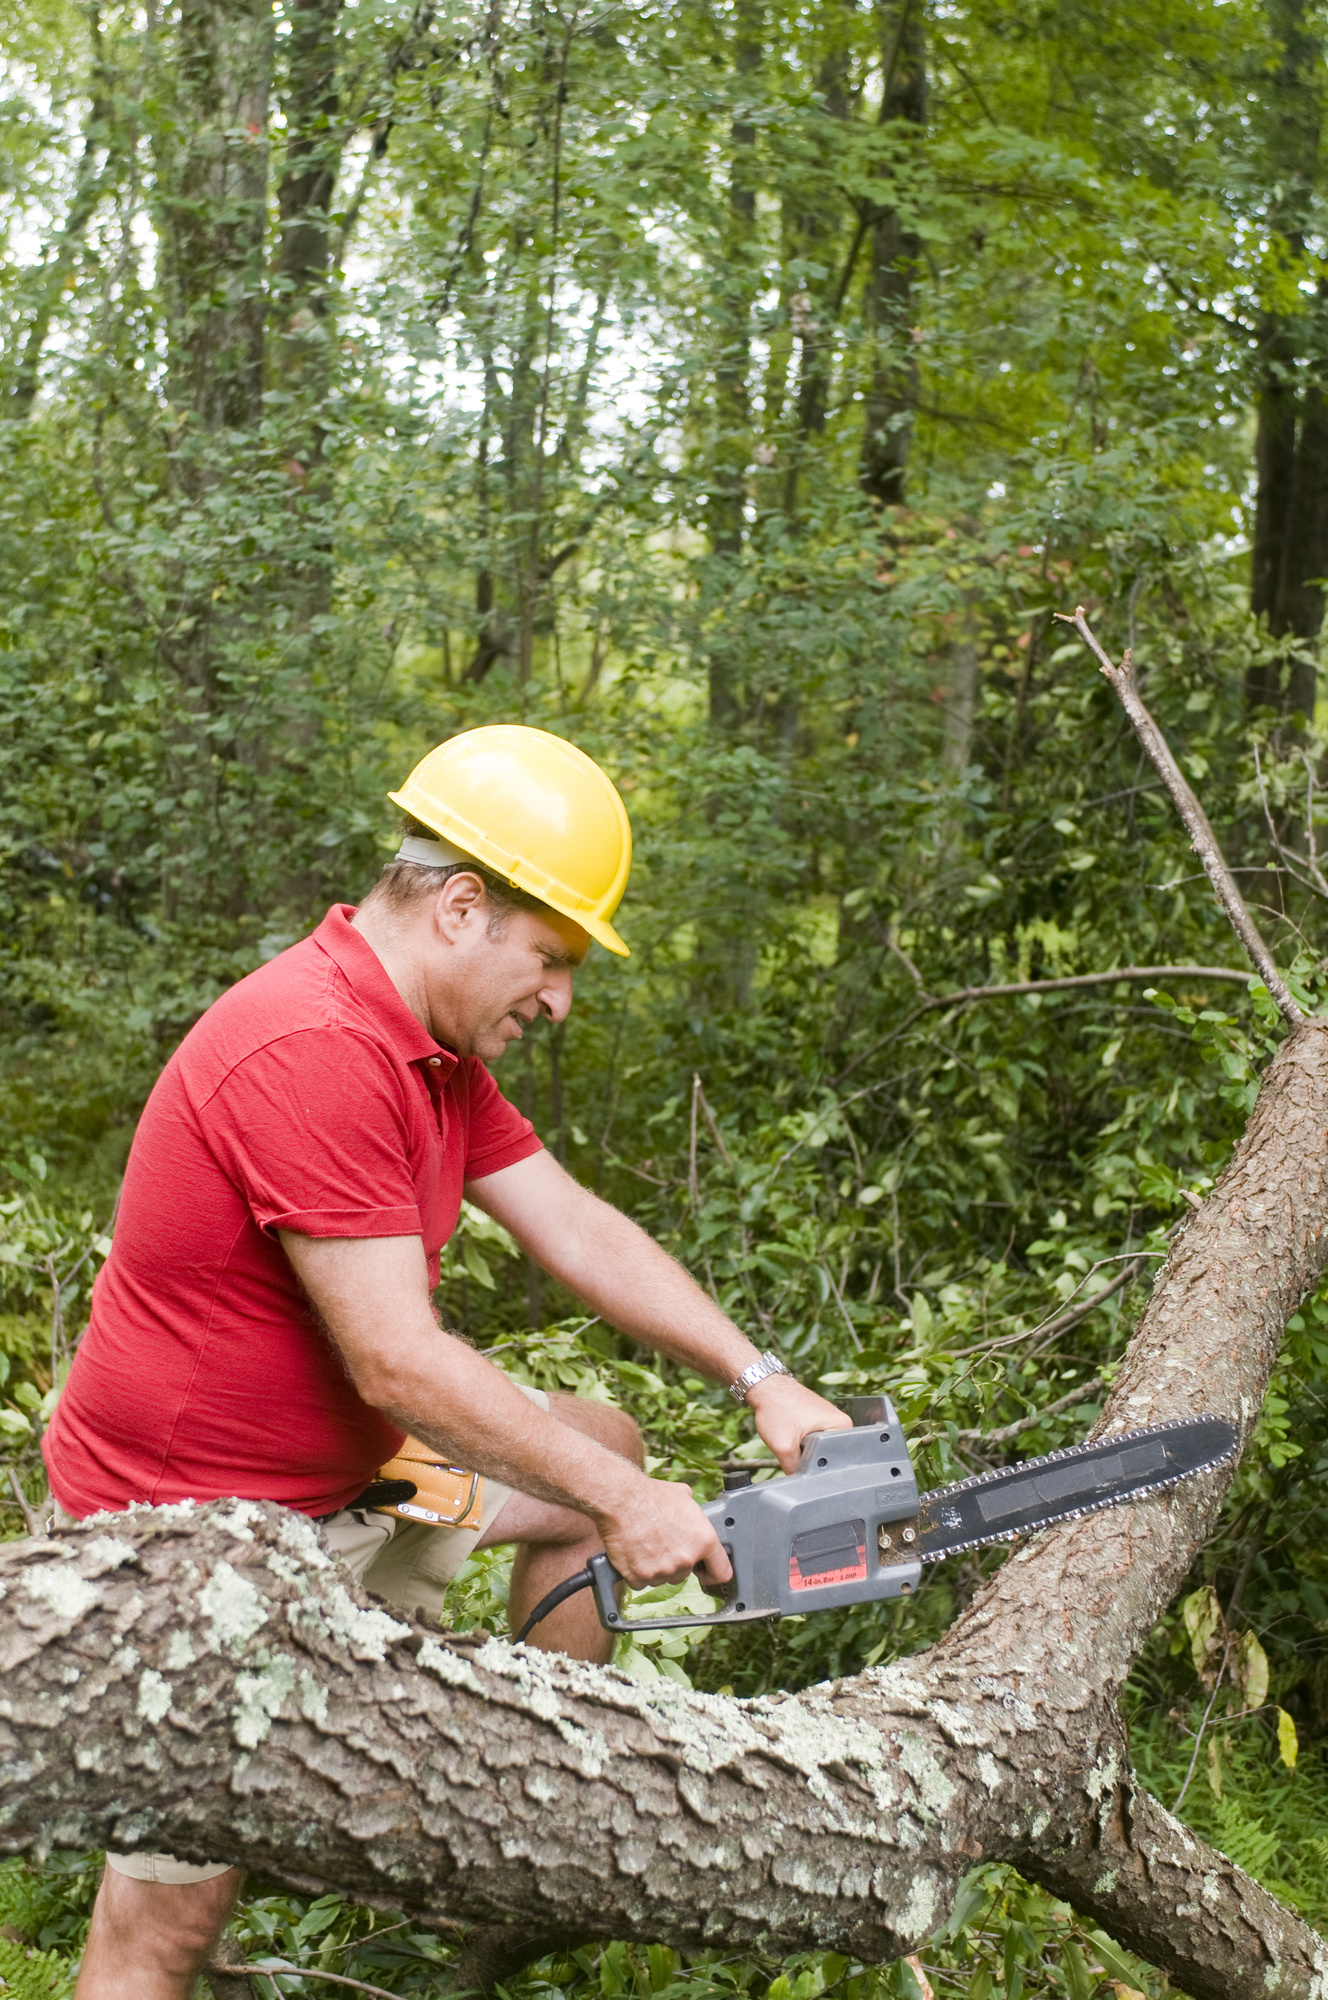 arborist tree surgeon using chainsaw to perform tree cutting service on fallen tree after a storm